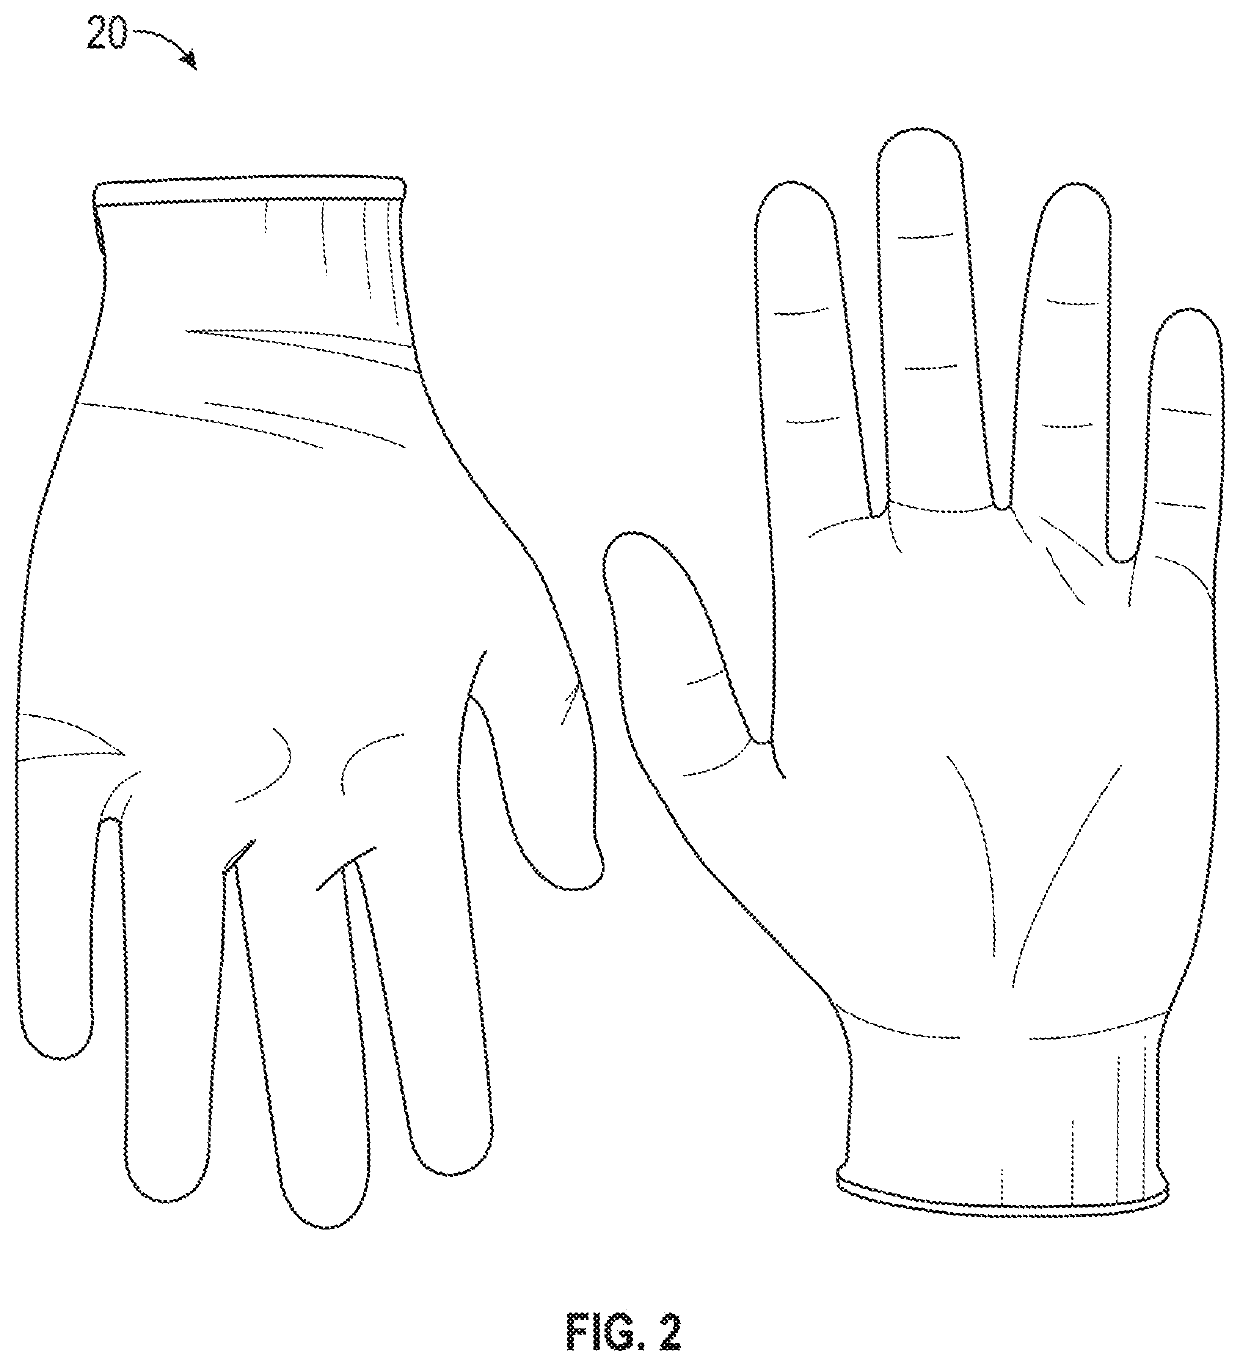 Protective Gloves with Improved Fingertip Fitment and Methods and Mold-Forms for Manufacturing Such Gloves